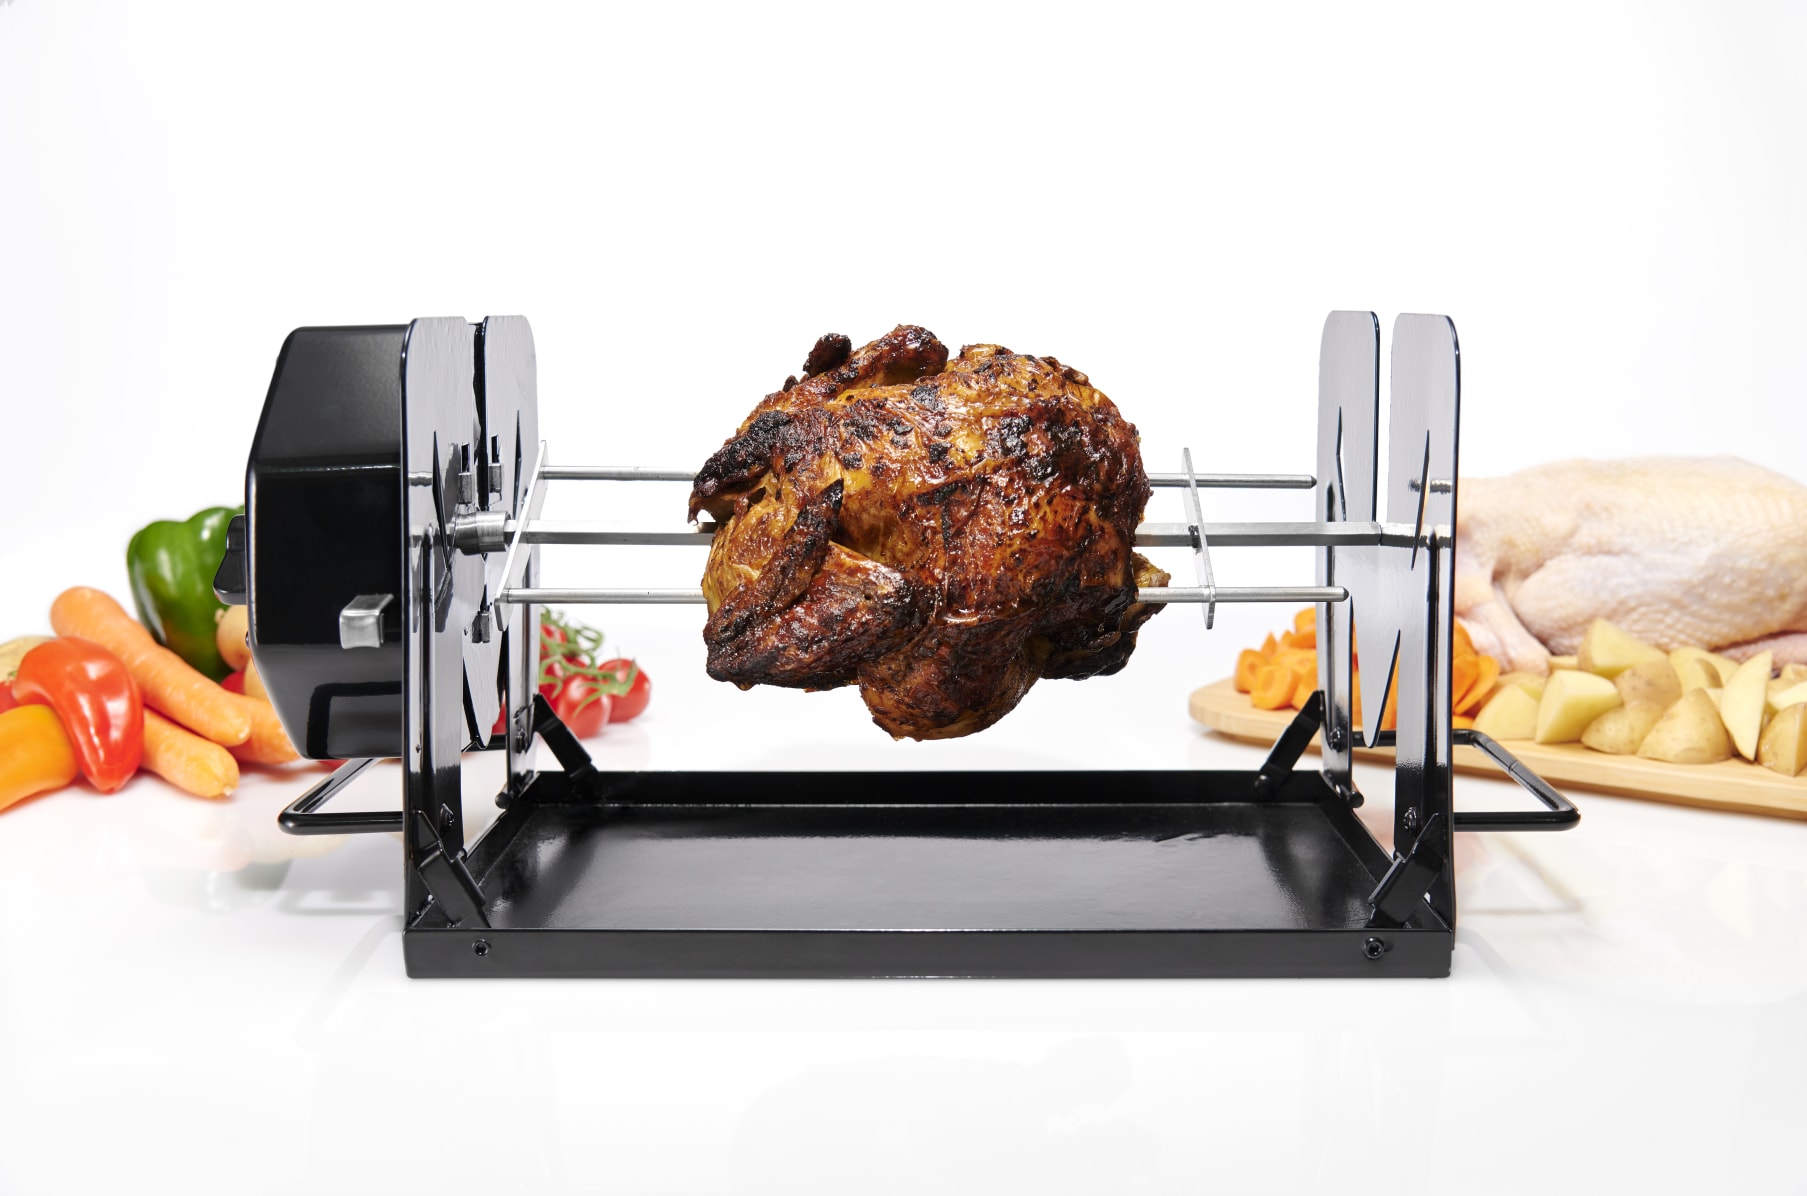 Rototisserie Non Electric Rotisserie Machine. Portable for Convection  Oven,Air Fryer Oven,BBQ Rotisserie,Fire Pit. Self Rotating Spit Roaster for